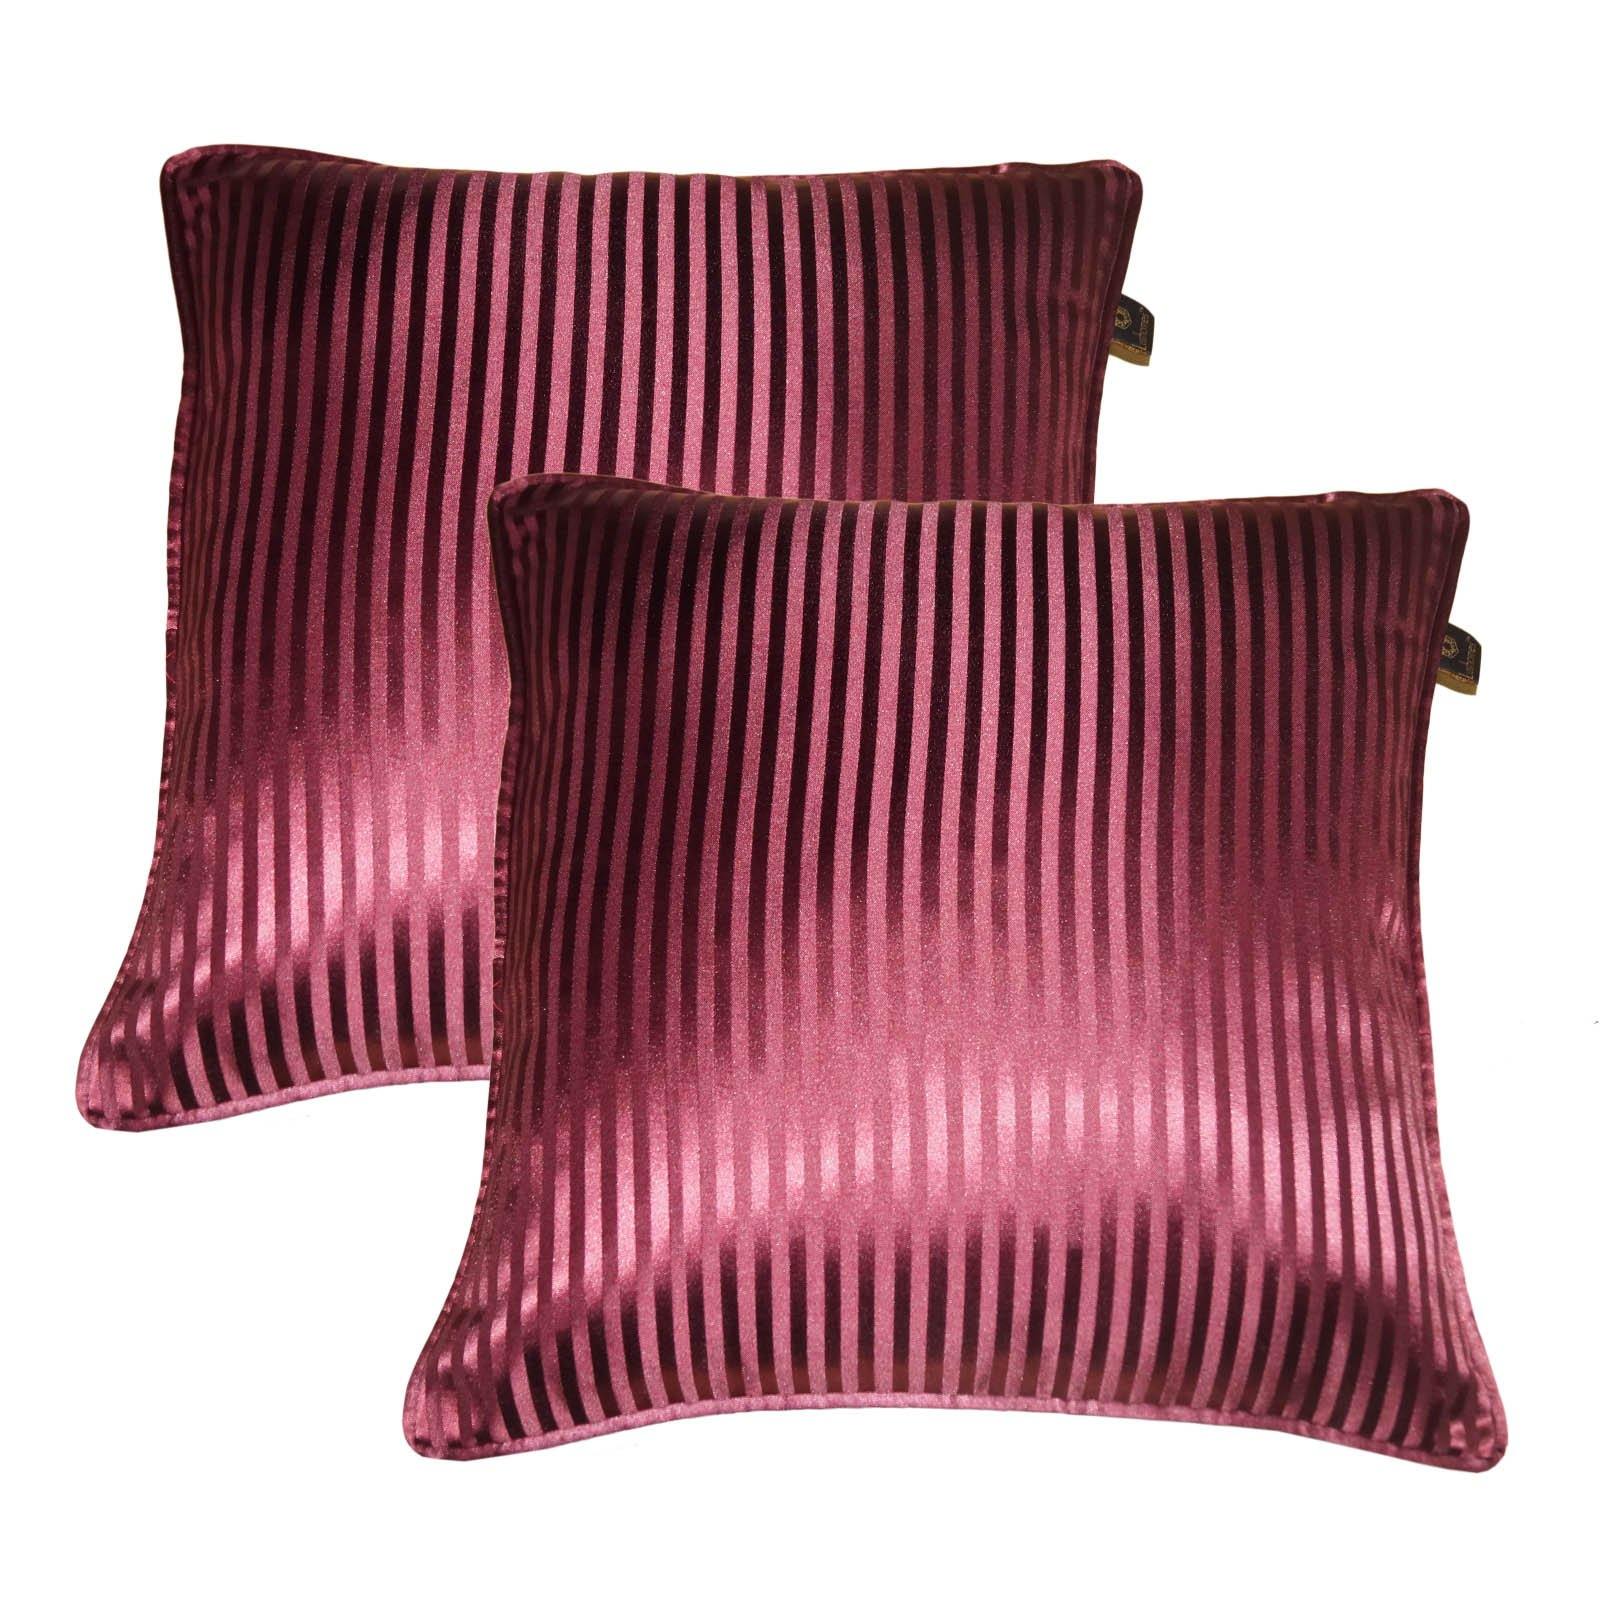 Lushomes burgundy contemporary plain cushion cover with striped piping, 12 x 12‰۝(Pack of 2) Torantina Collection - Lushomes